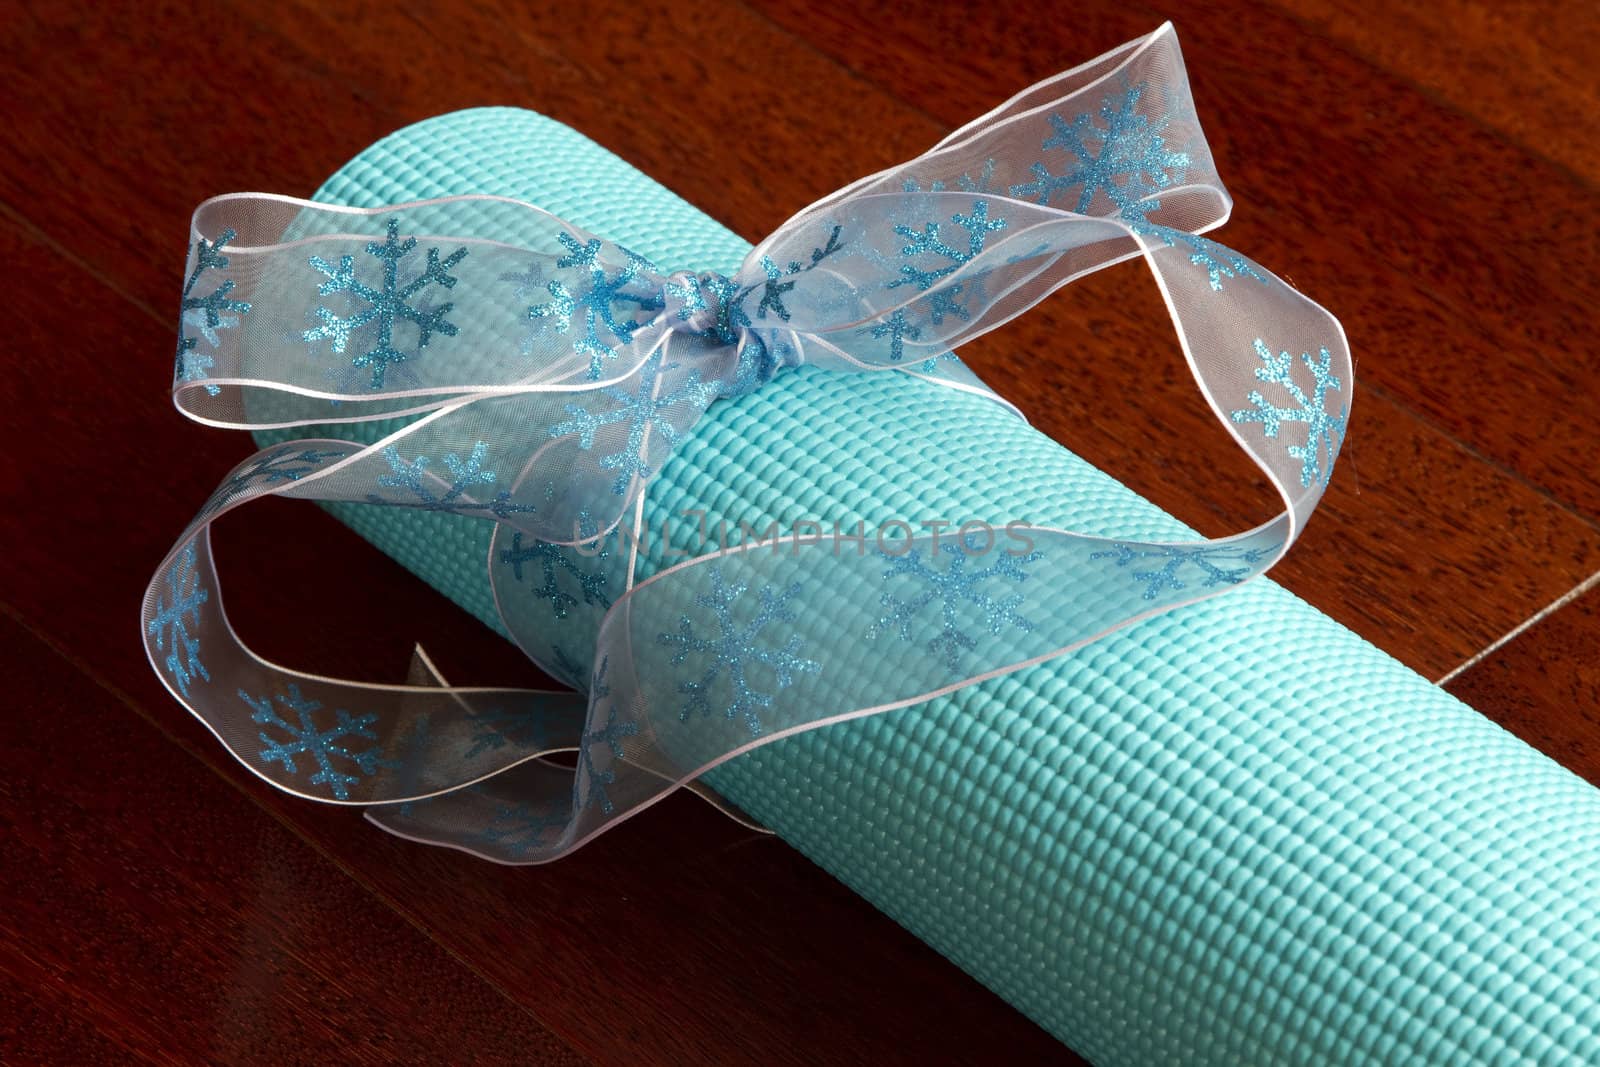 Sky blue yoga mat with blue ribbon is a gift placed on a wood floor